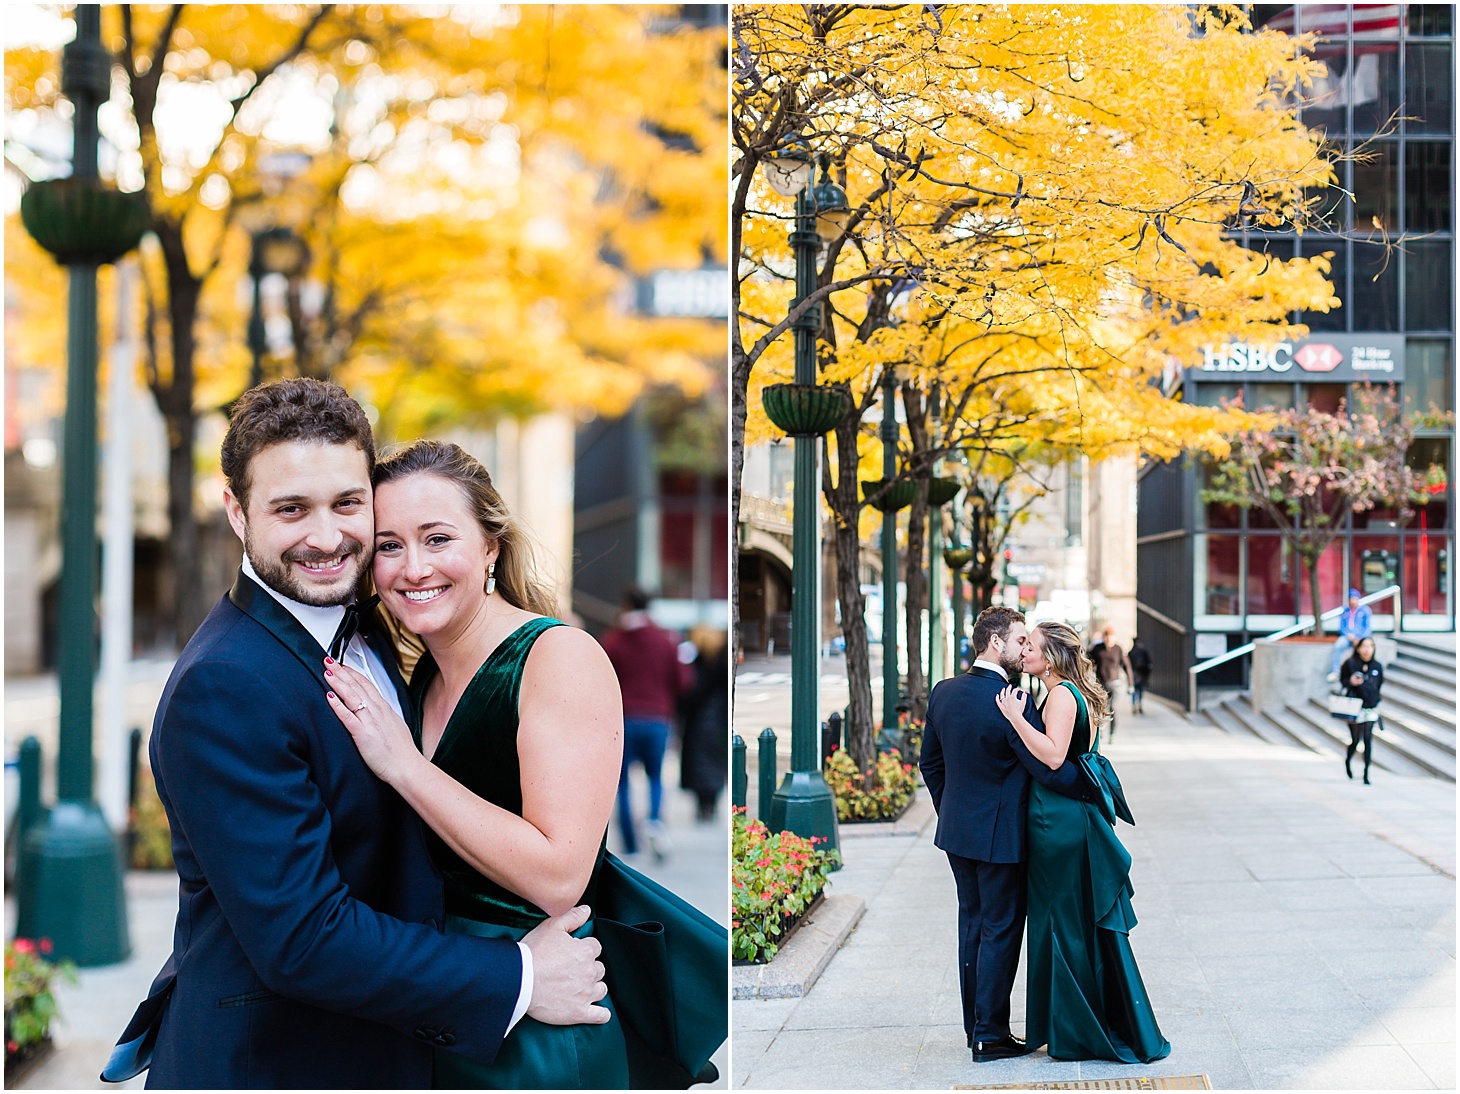 Engagement Portraits in New York City | Sunrise Engagement at the Brooklyn Bridge, Top of Rock, and Grand Central Station | Sarah Bradshaw Photography